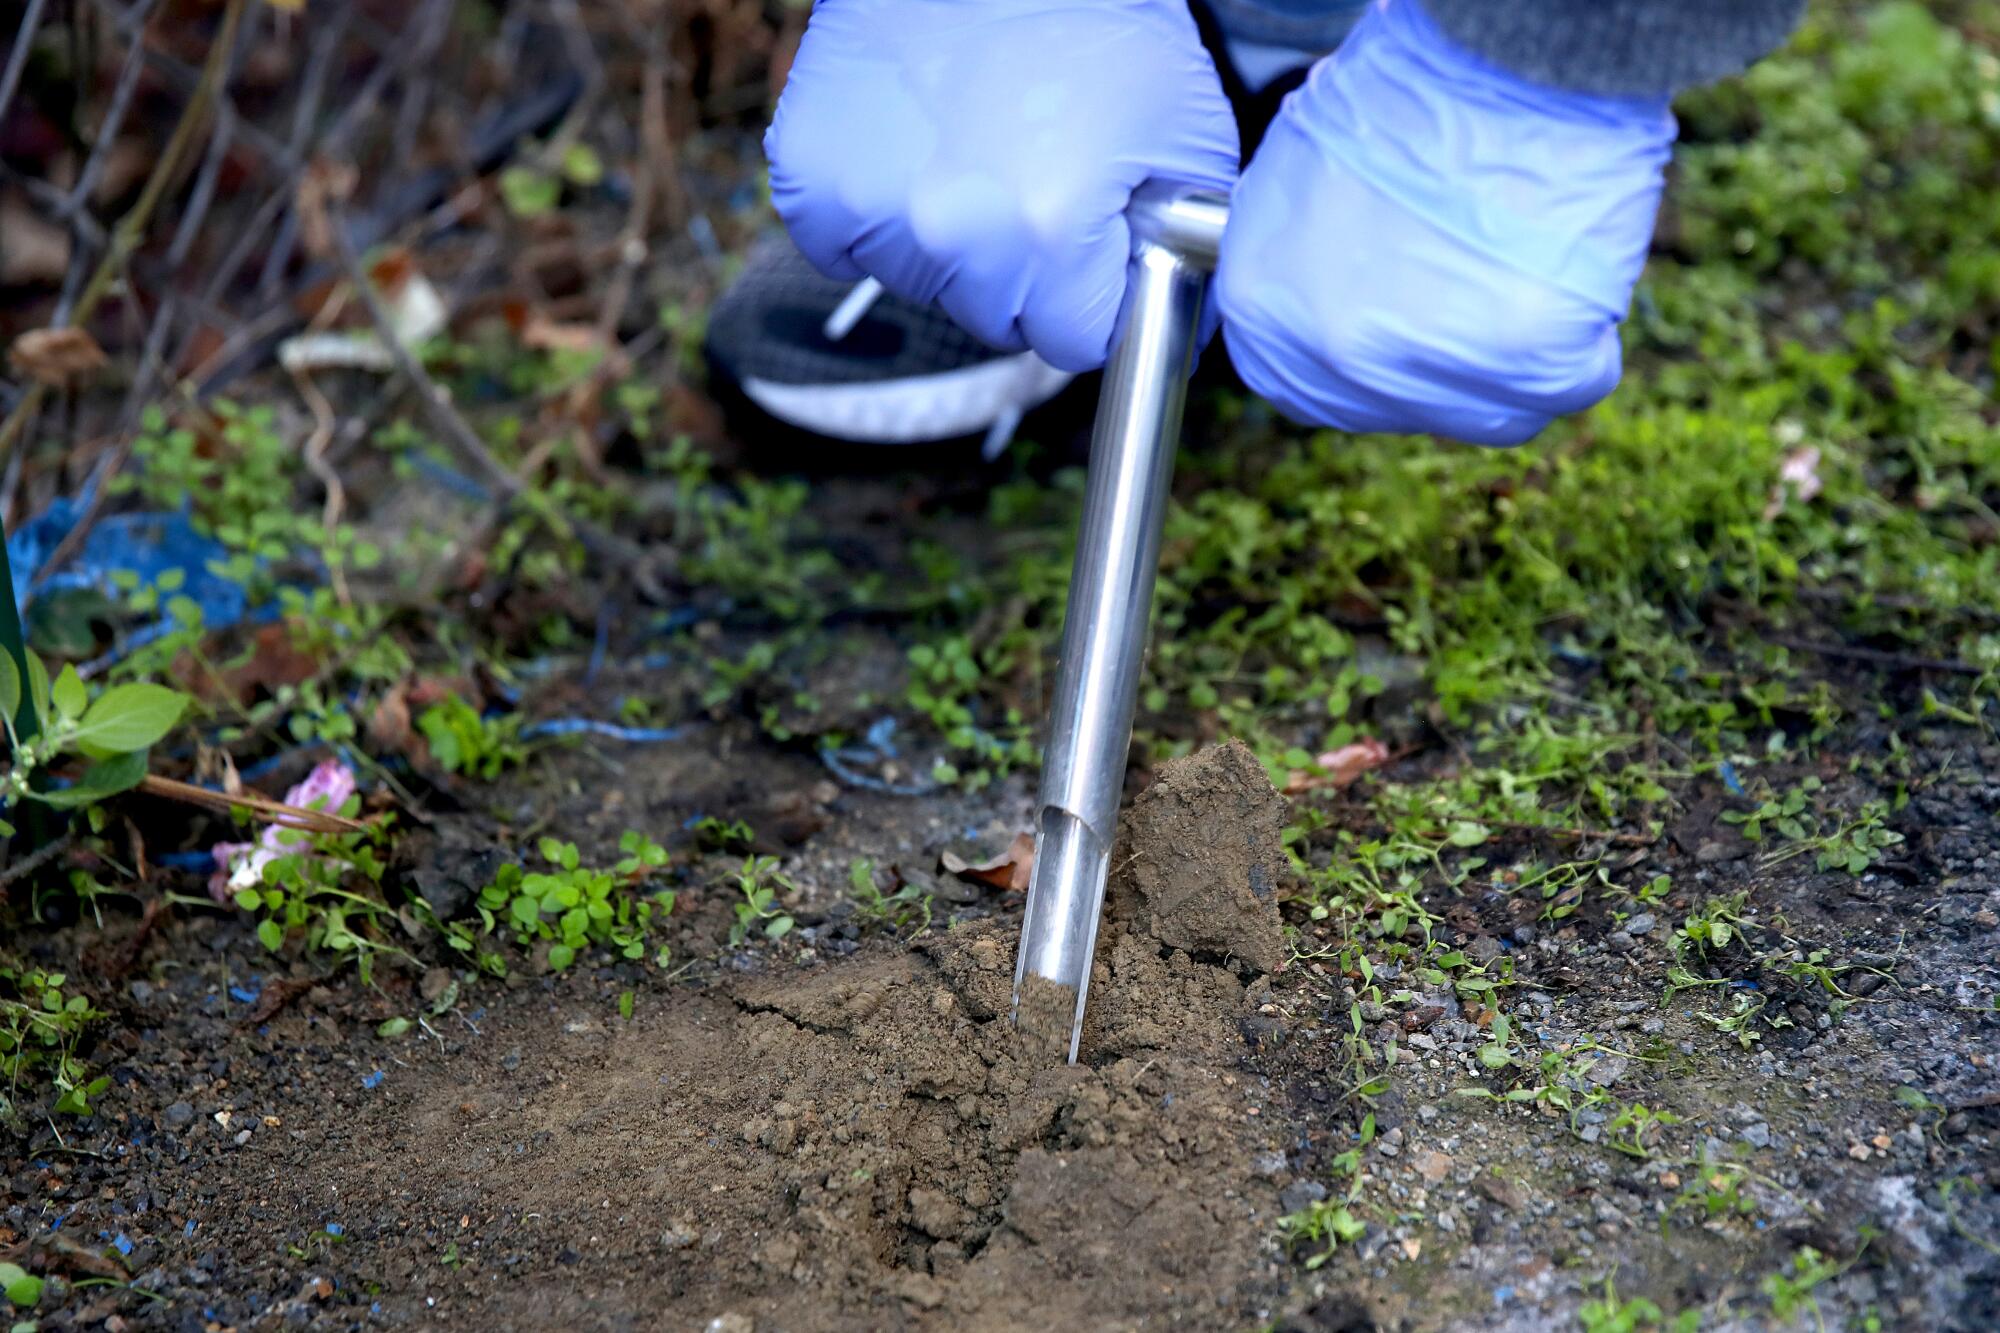 A person wearing protective gloves uses a tool to remove soil from the ground.